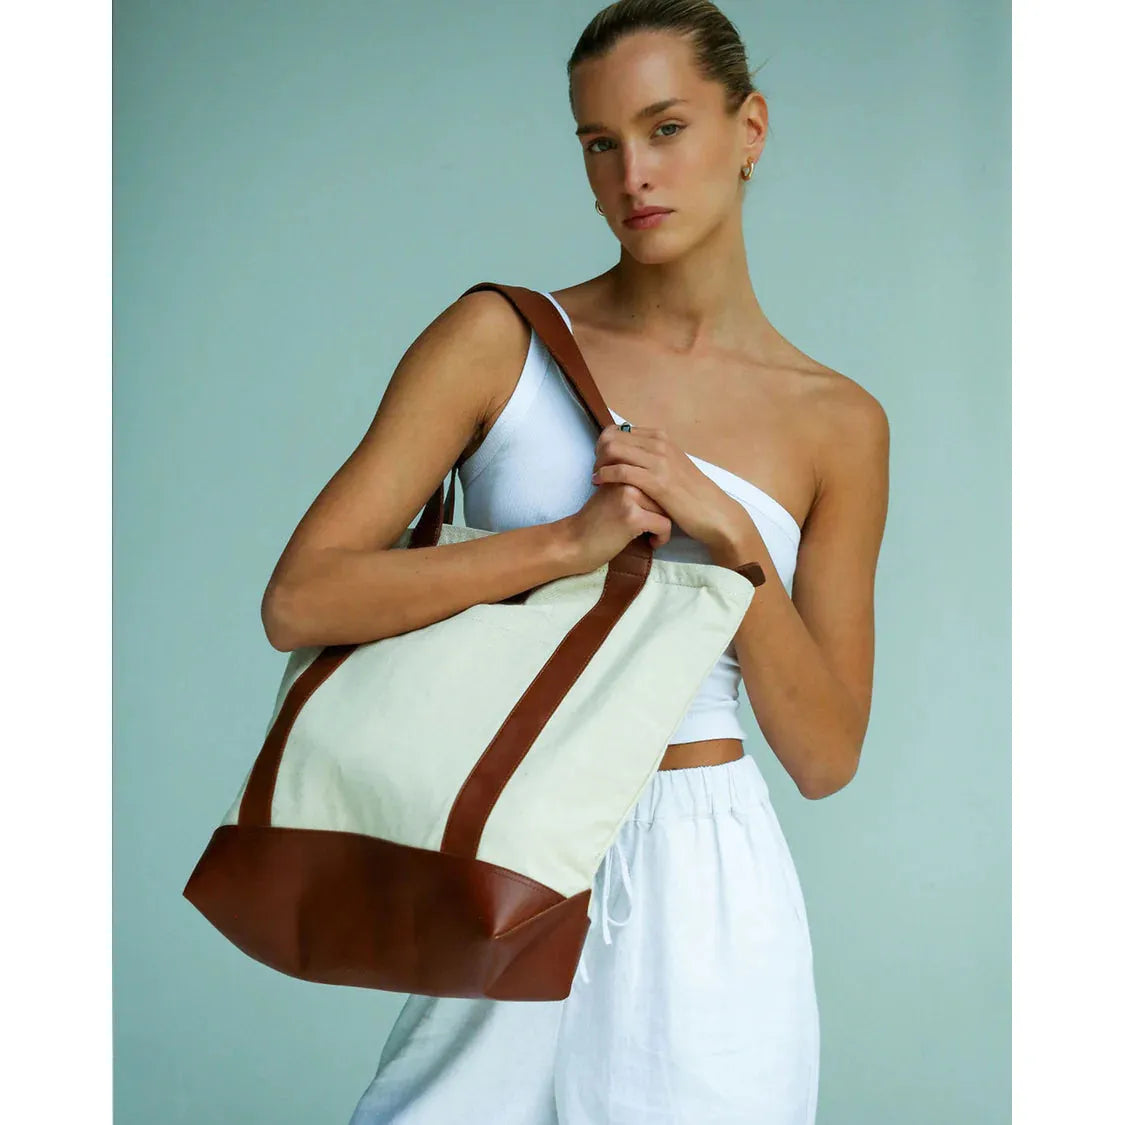 The Classic Commuter Tote